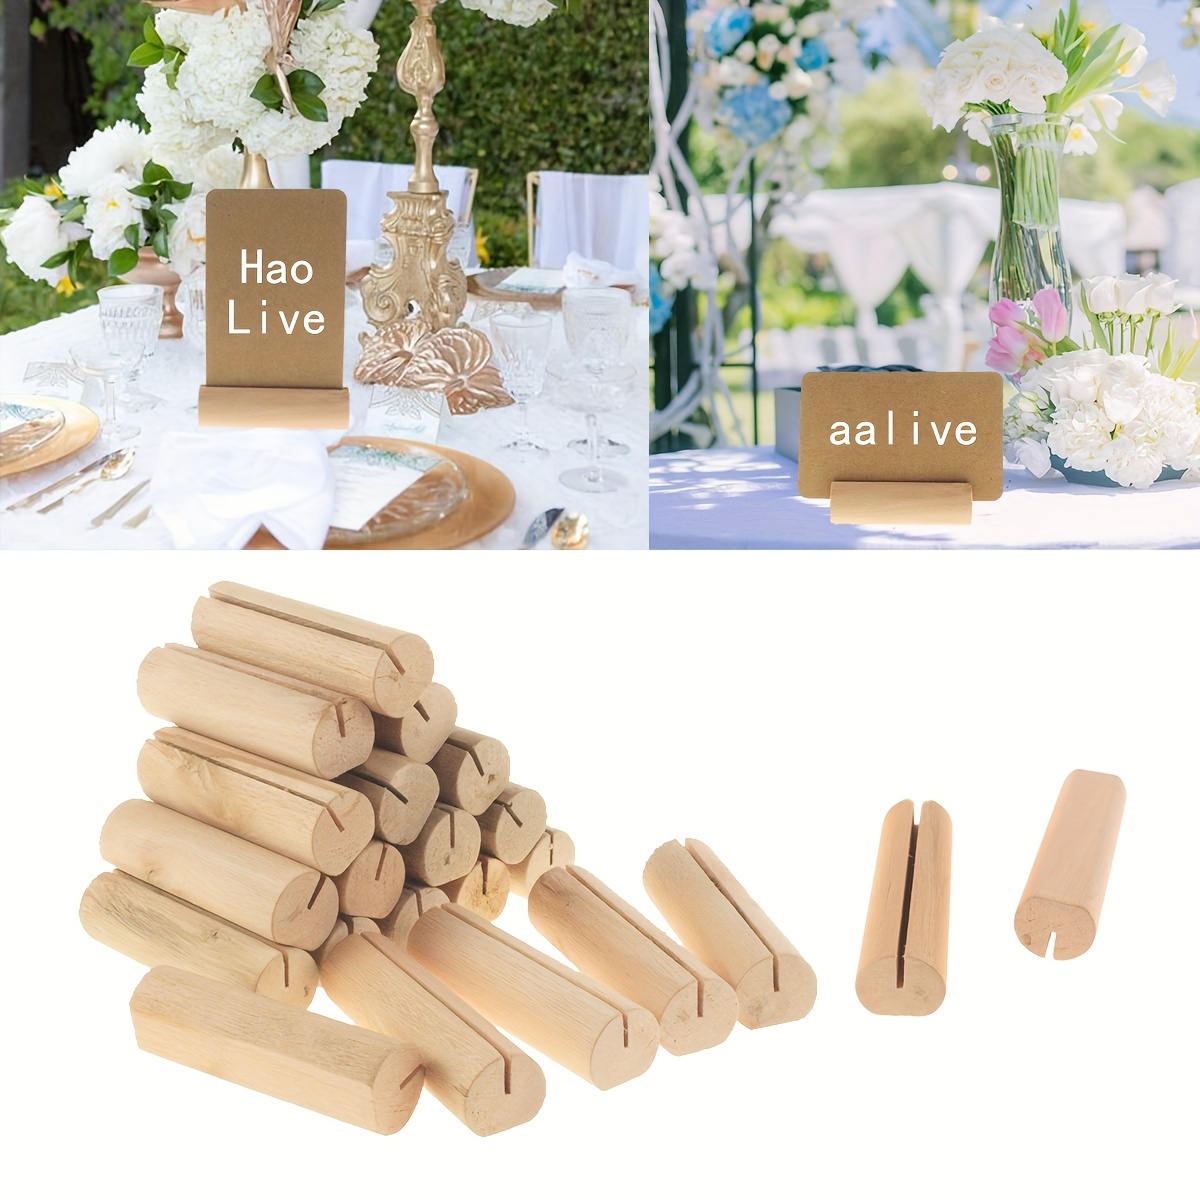 

20pcs Rustic Wooden Card Holders, Table Number Stands For Weddings & Events, Pine Wood Craft Memo Clips, Photo Holder Decorative Accessories